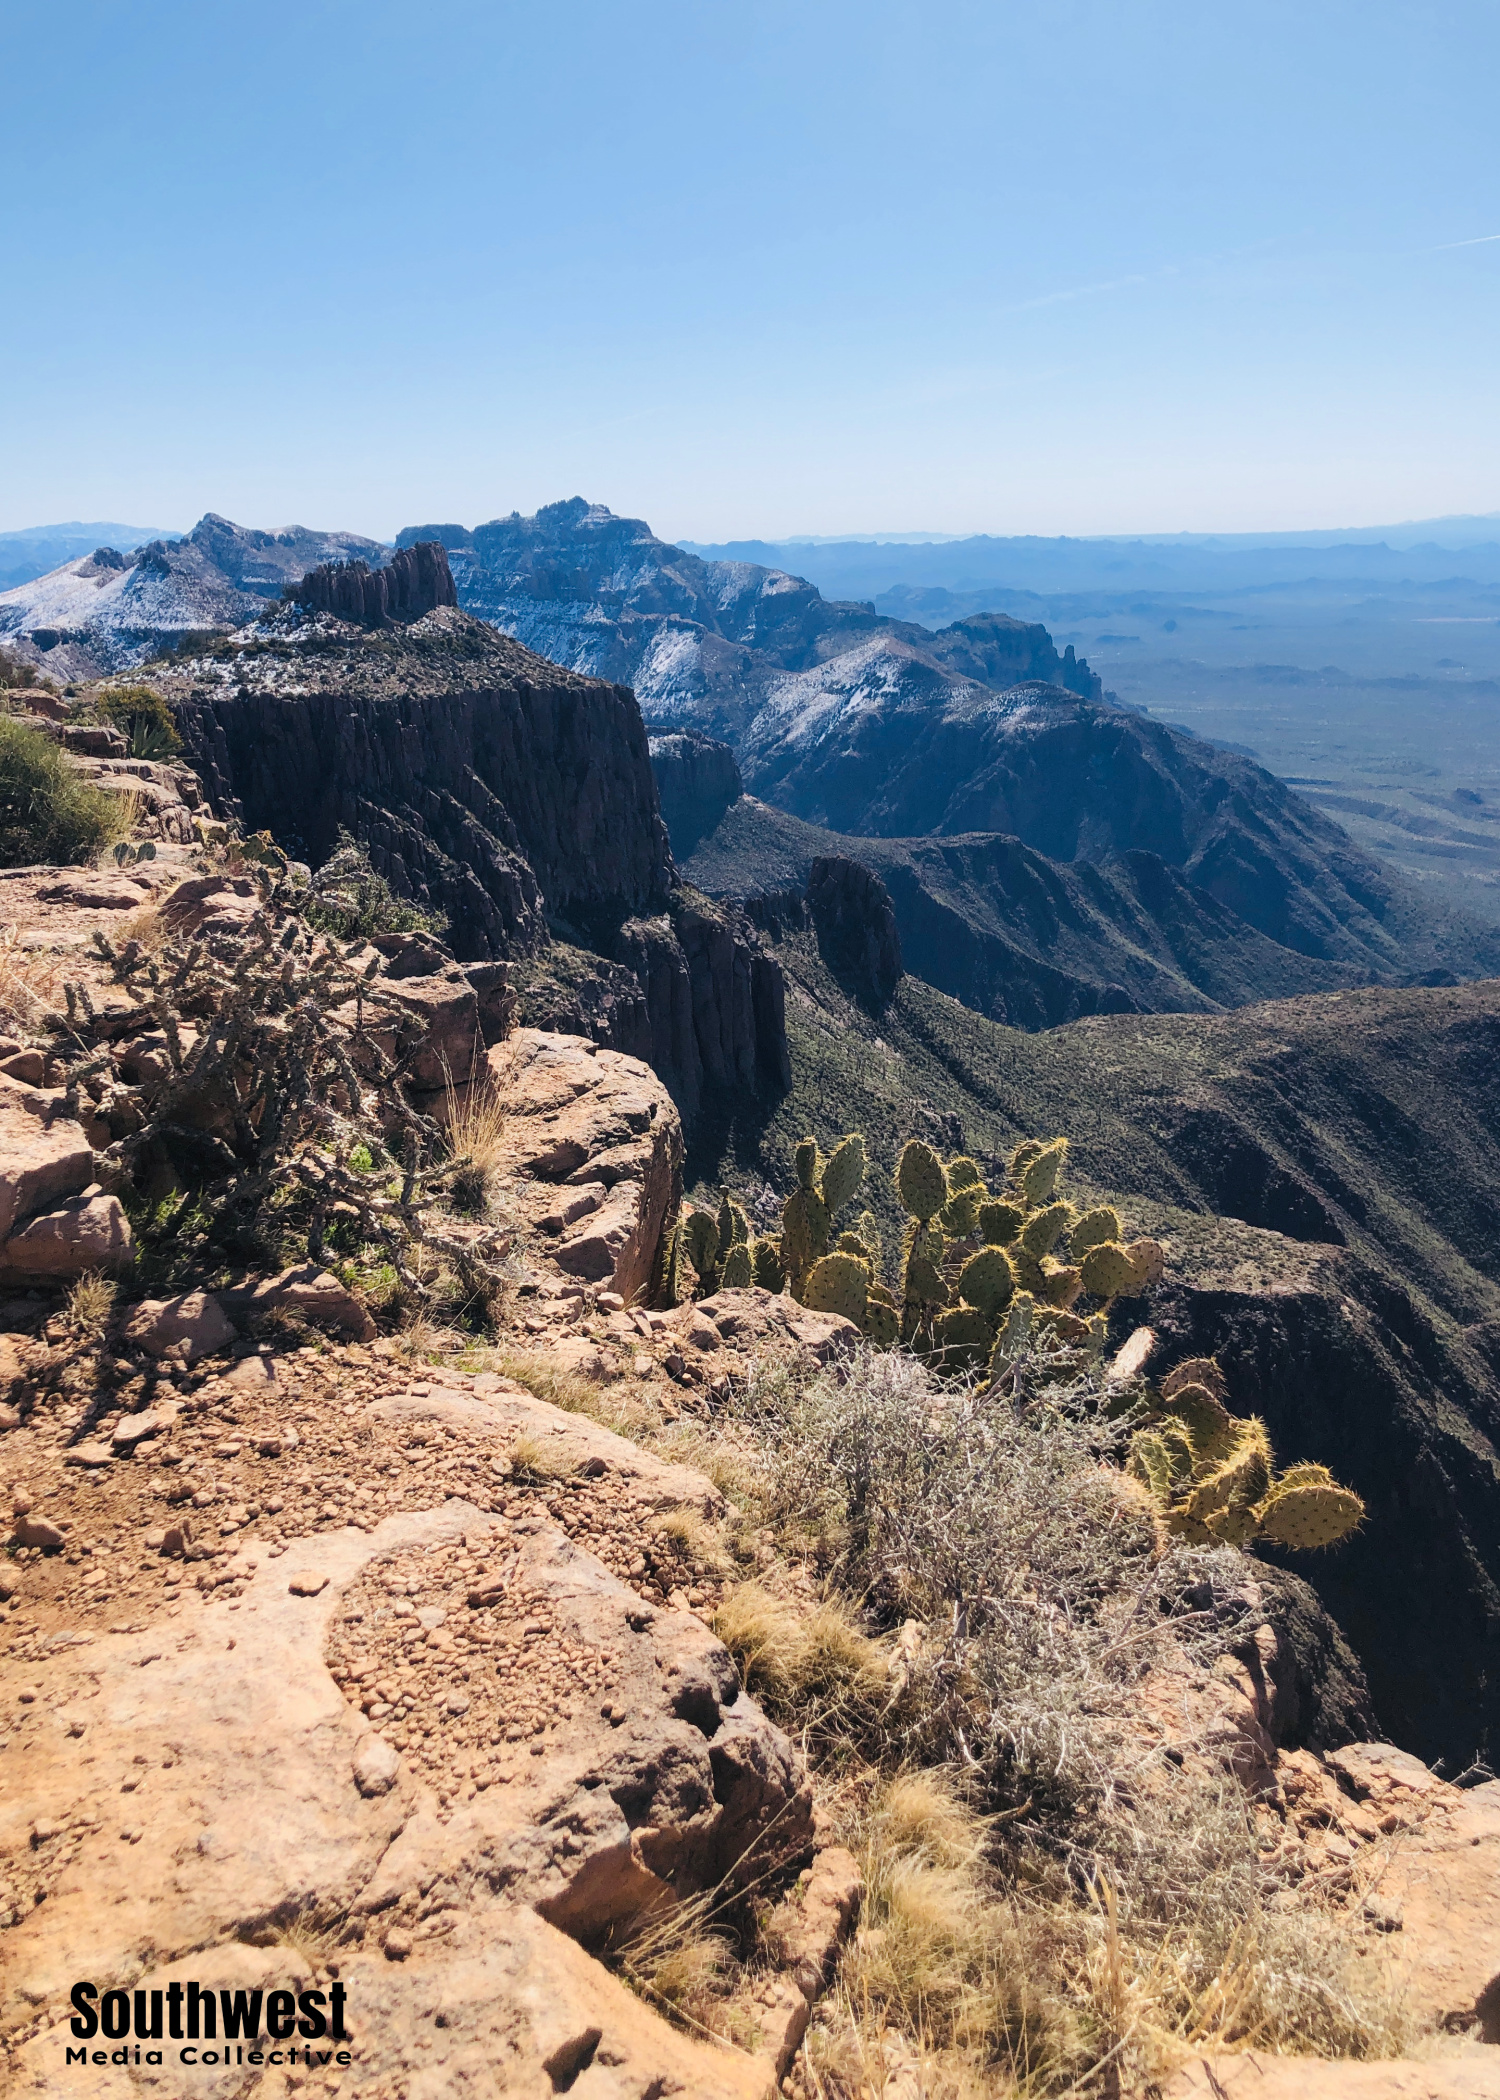 Flatiron via Siphon Draw is one of the most challenging hiking trails in the Phoenix area. Here are 5 tips to help you hike successfully to the summit of Flatiron in the Superstition Mountains!